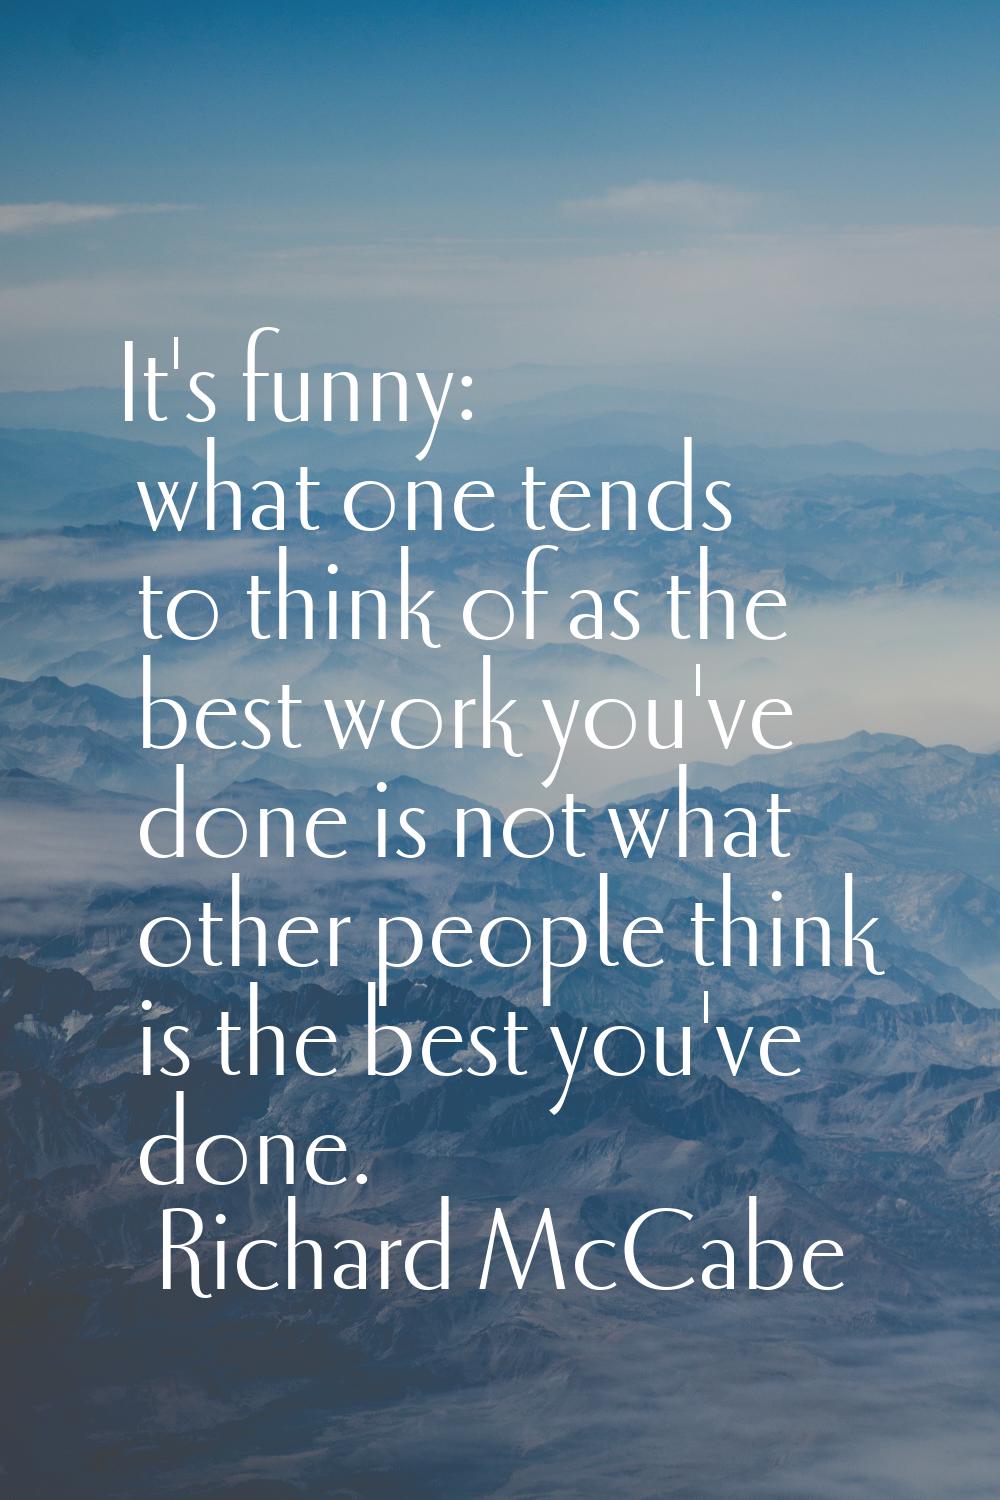 It's funny: what one tends to think of as the best work you've done is not what other people think 